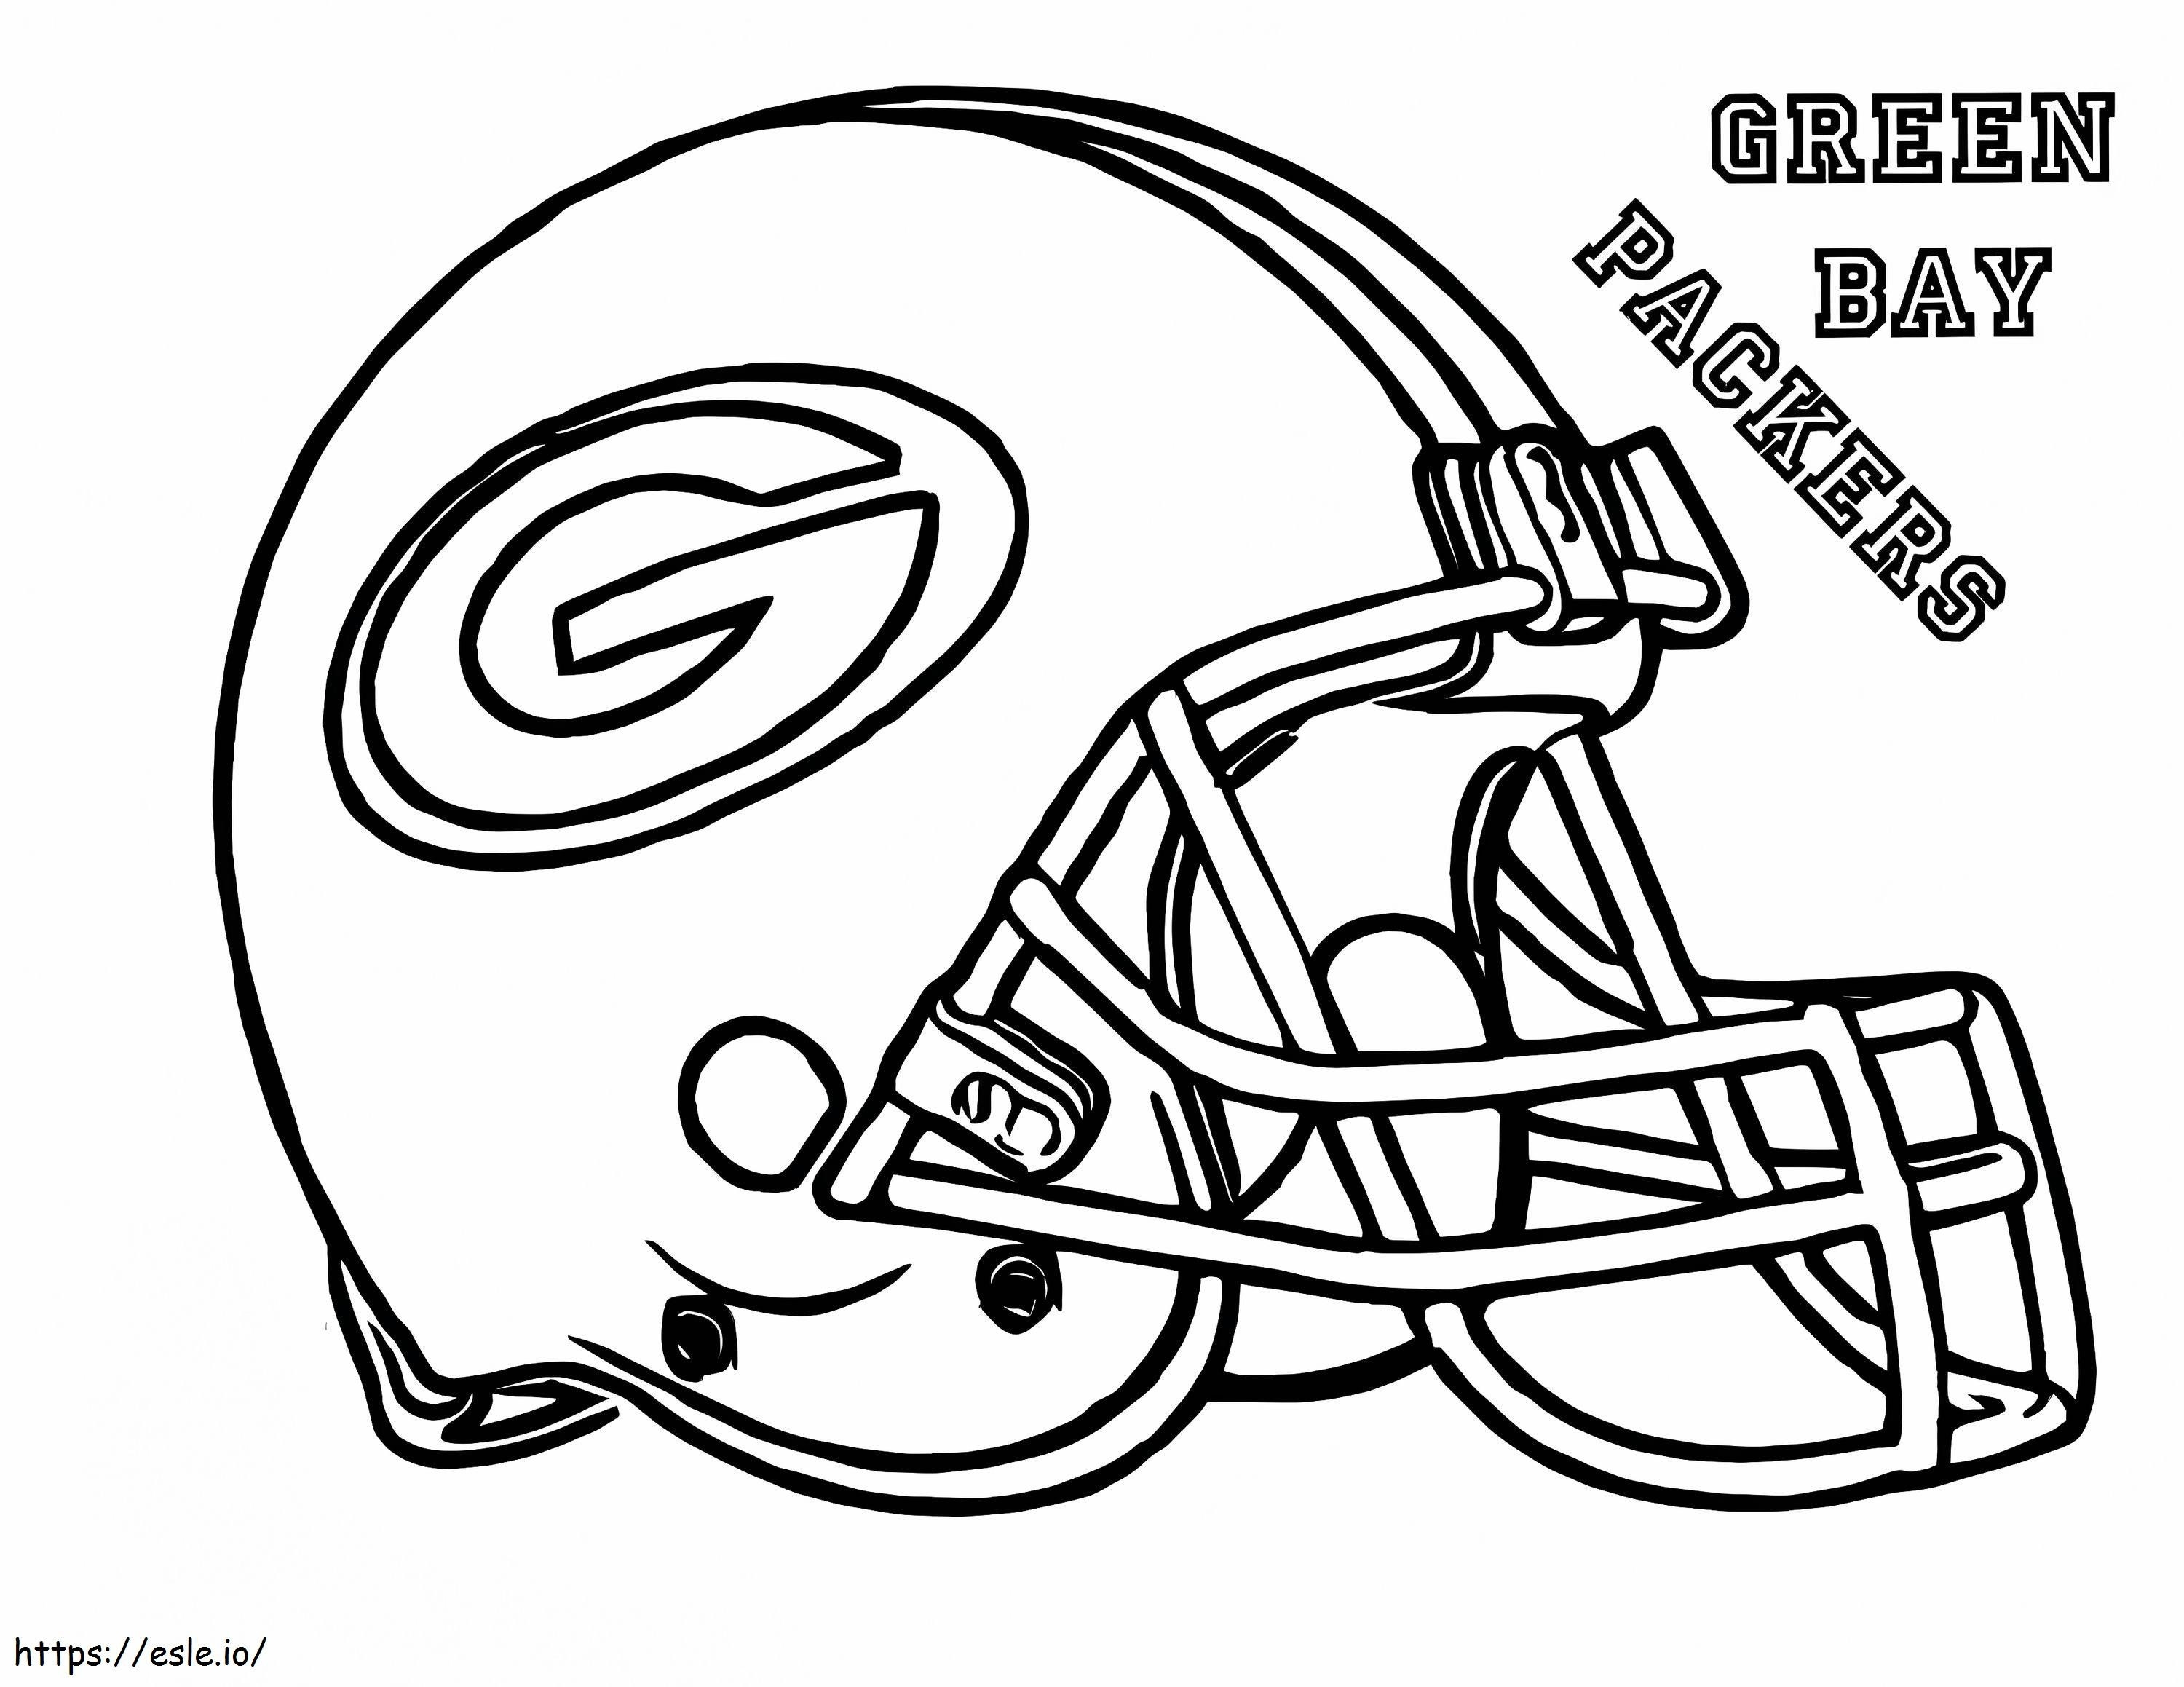 Green Bay Packers coloring page